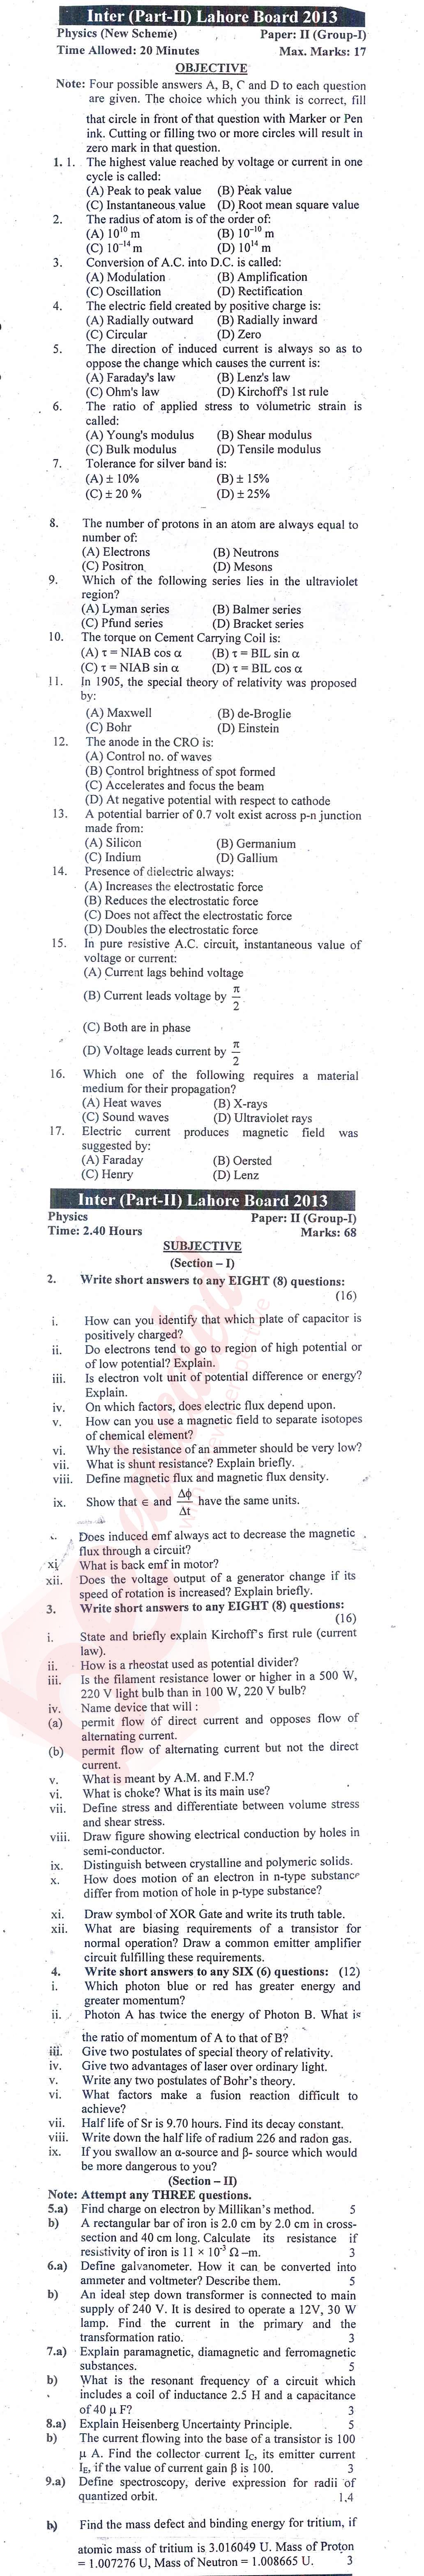 Physics 12th class Past Paper Group 1 BISE Lahore 2013